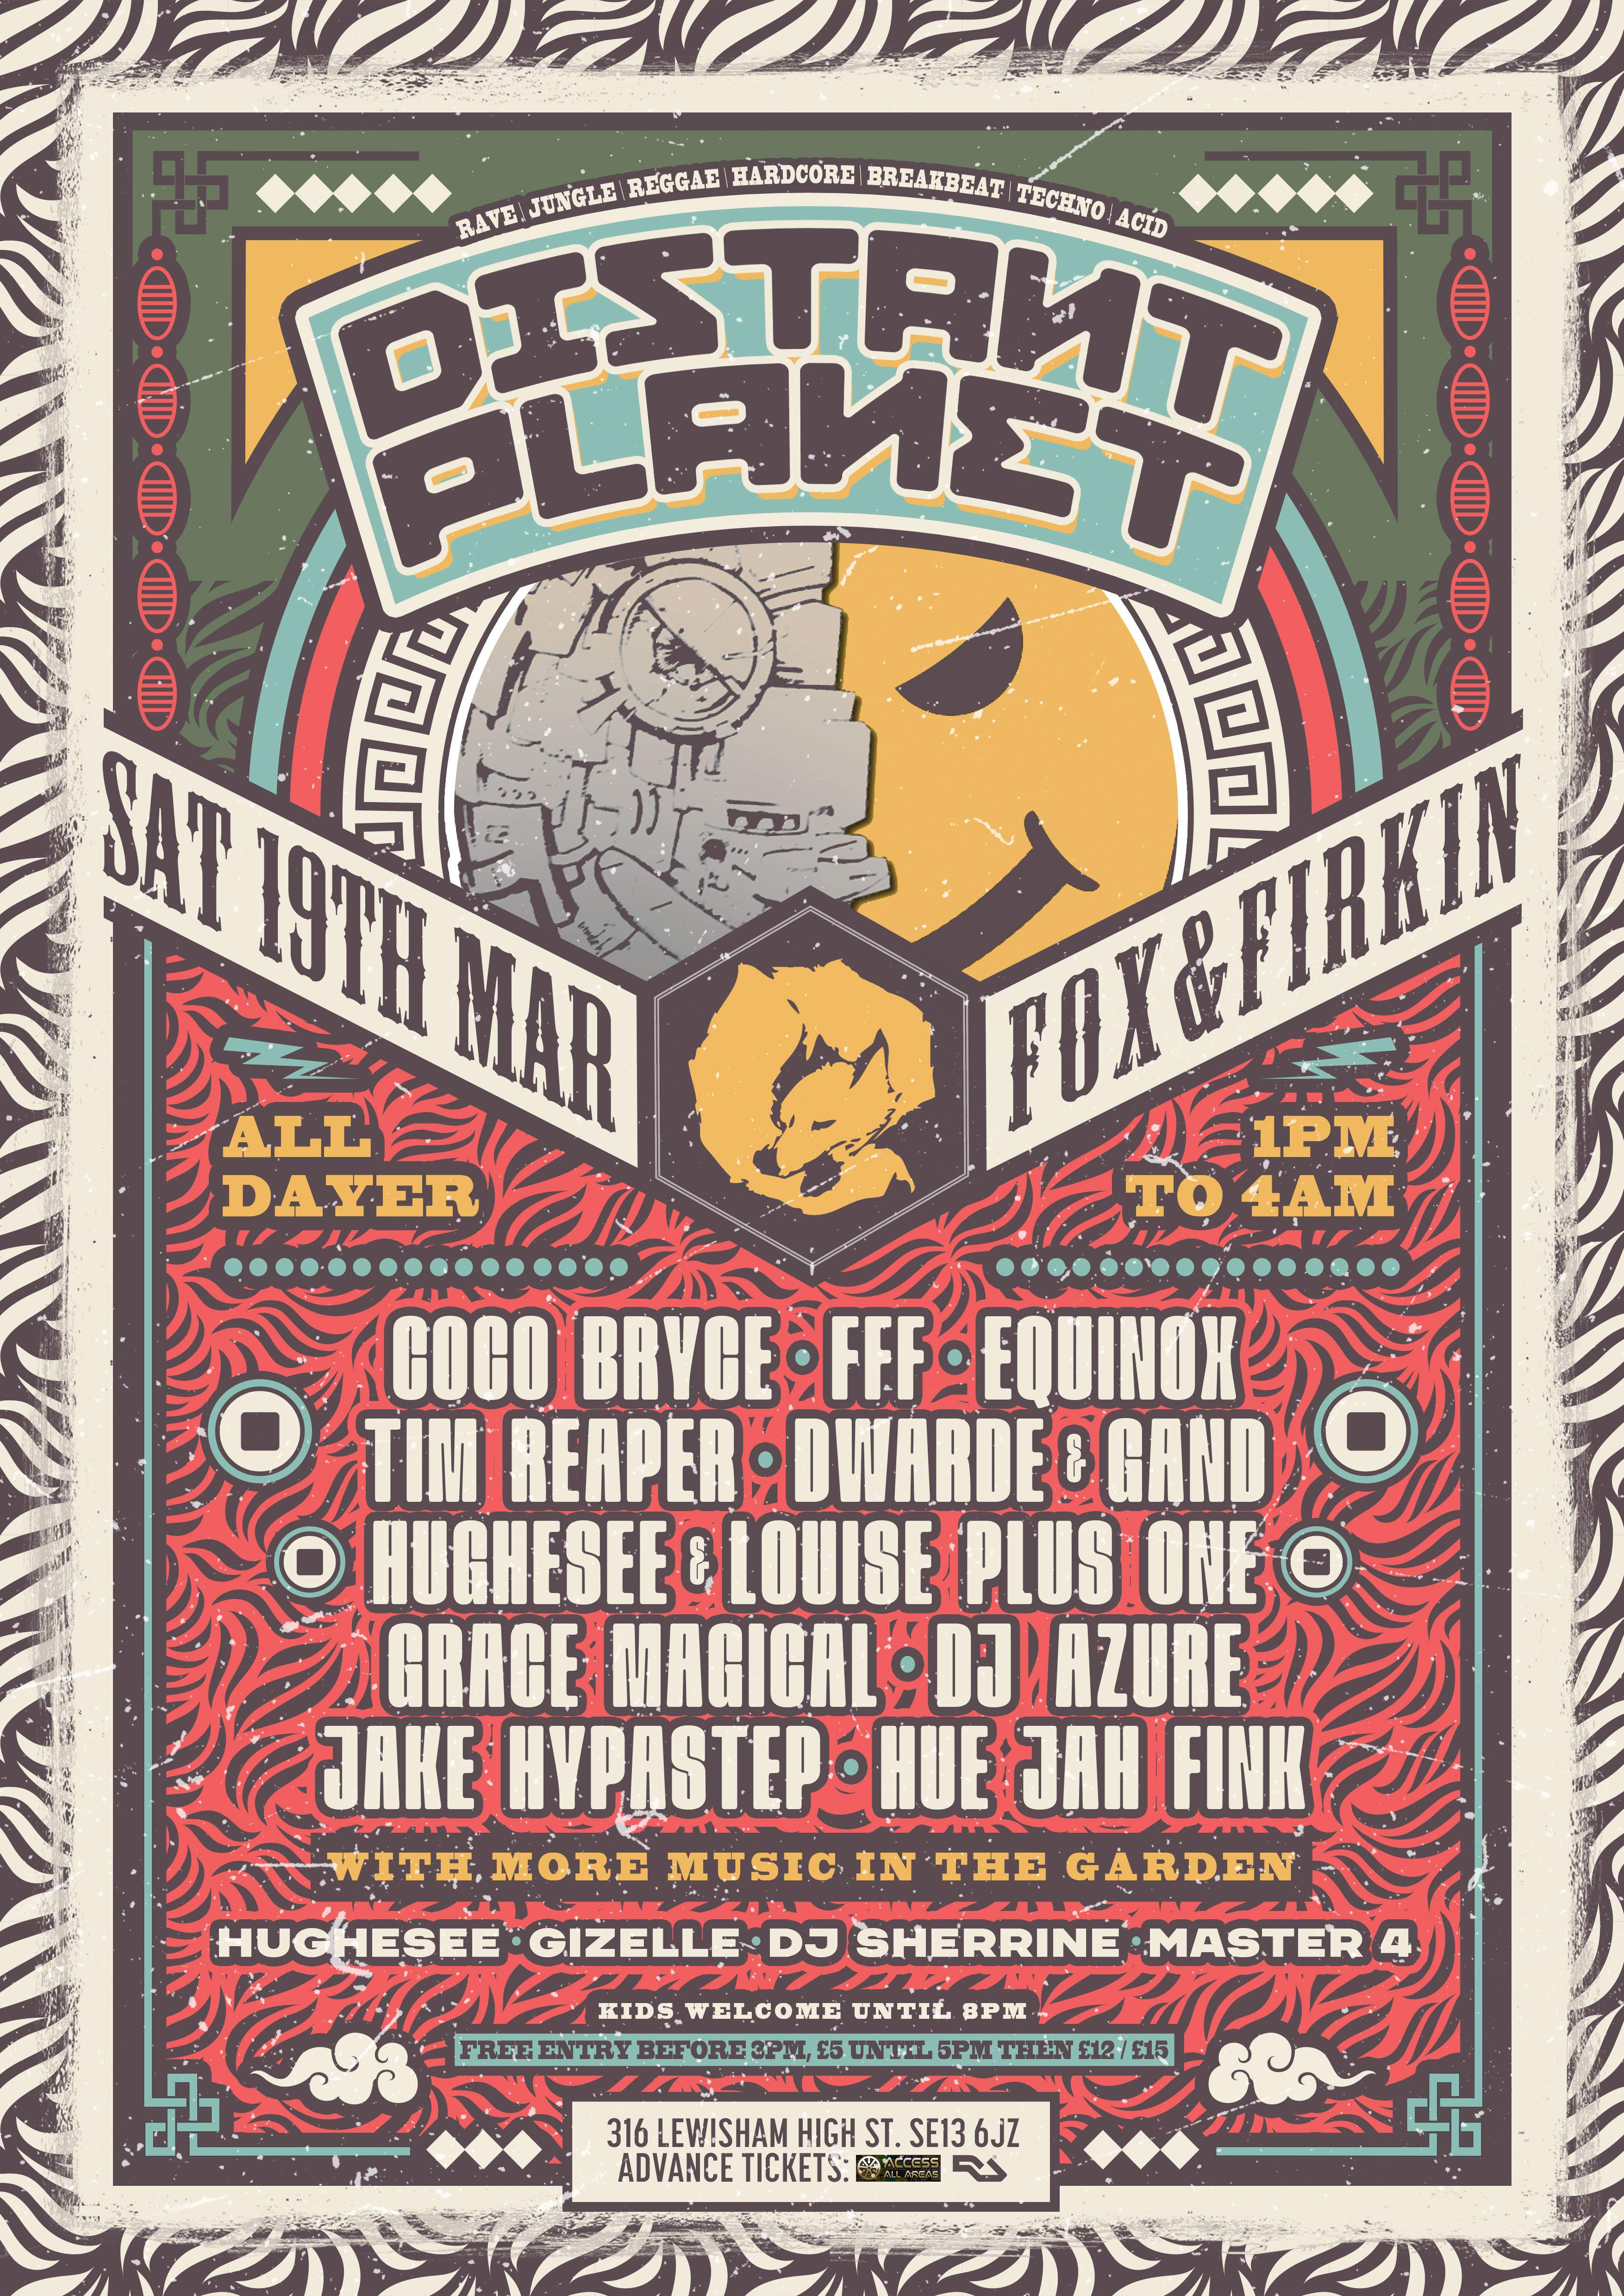 Distant Planet - All Dayer / Nighter with Coco Bryce / FFF / Tim Reaper / Louise +1 & Hughesee - フライヤー表